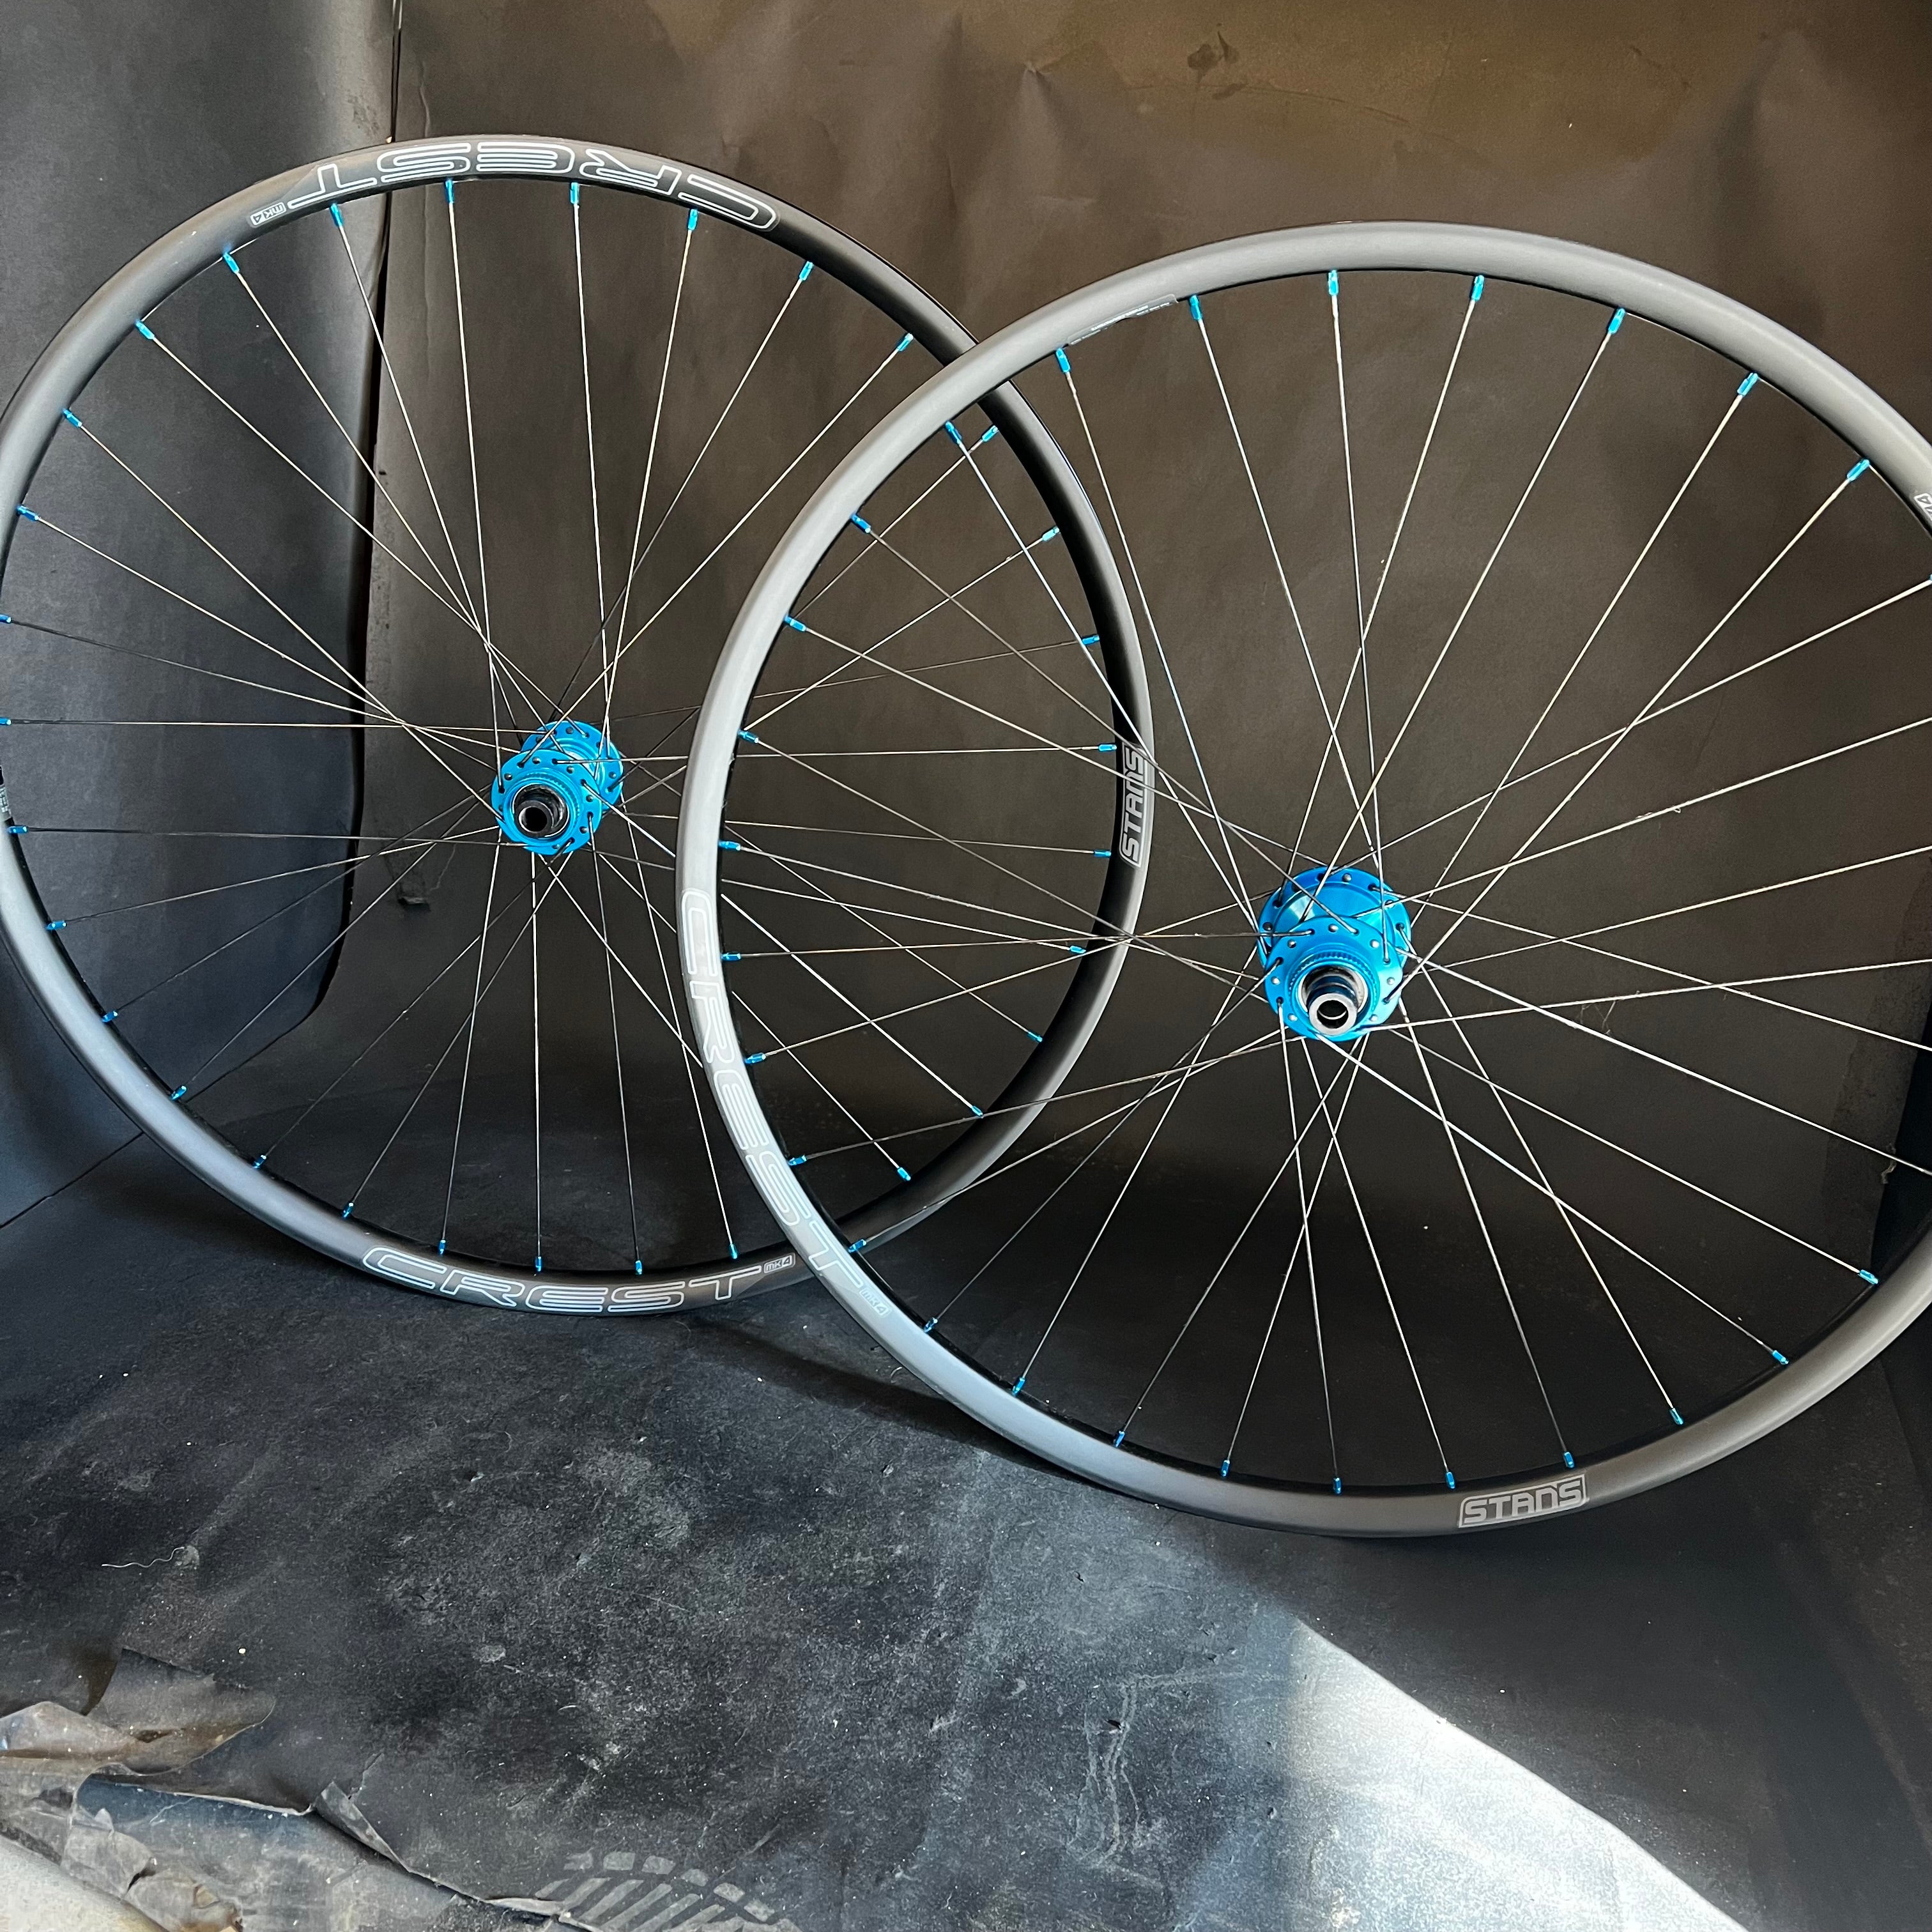 650b gravel wheels with hope RS4 hubs and stans crest rims